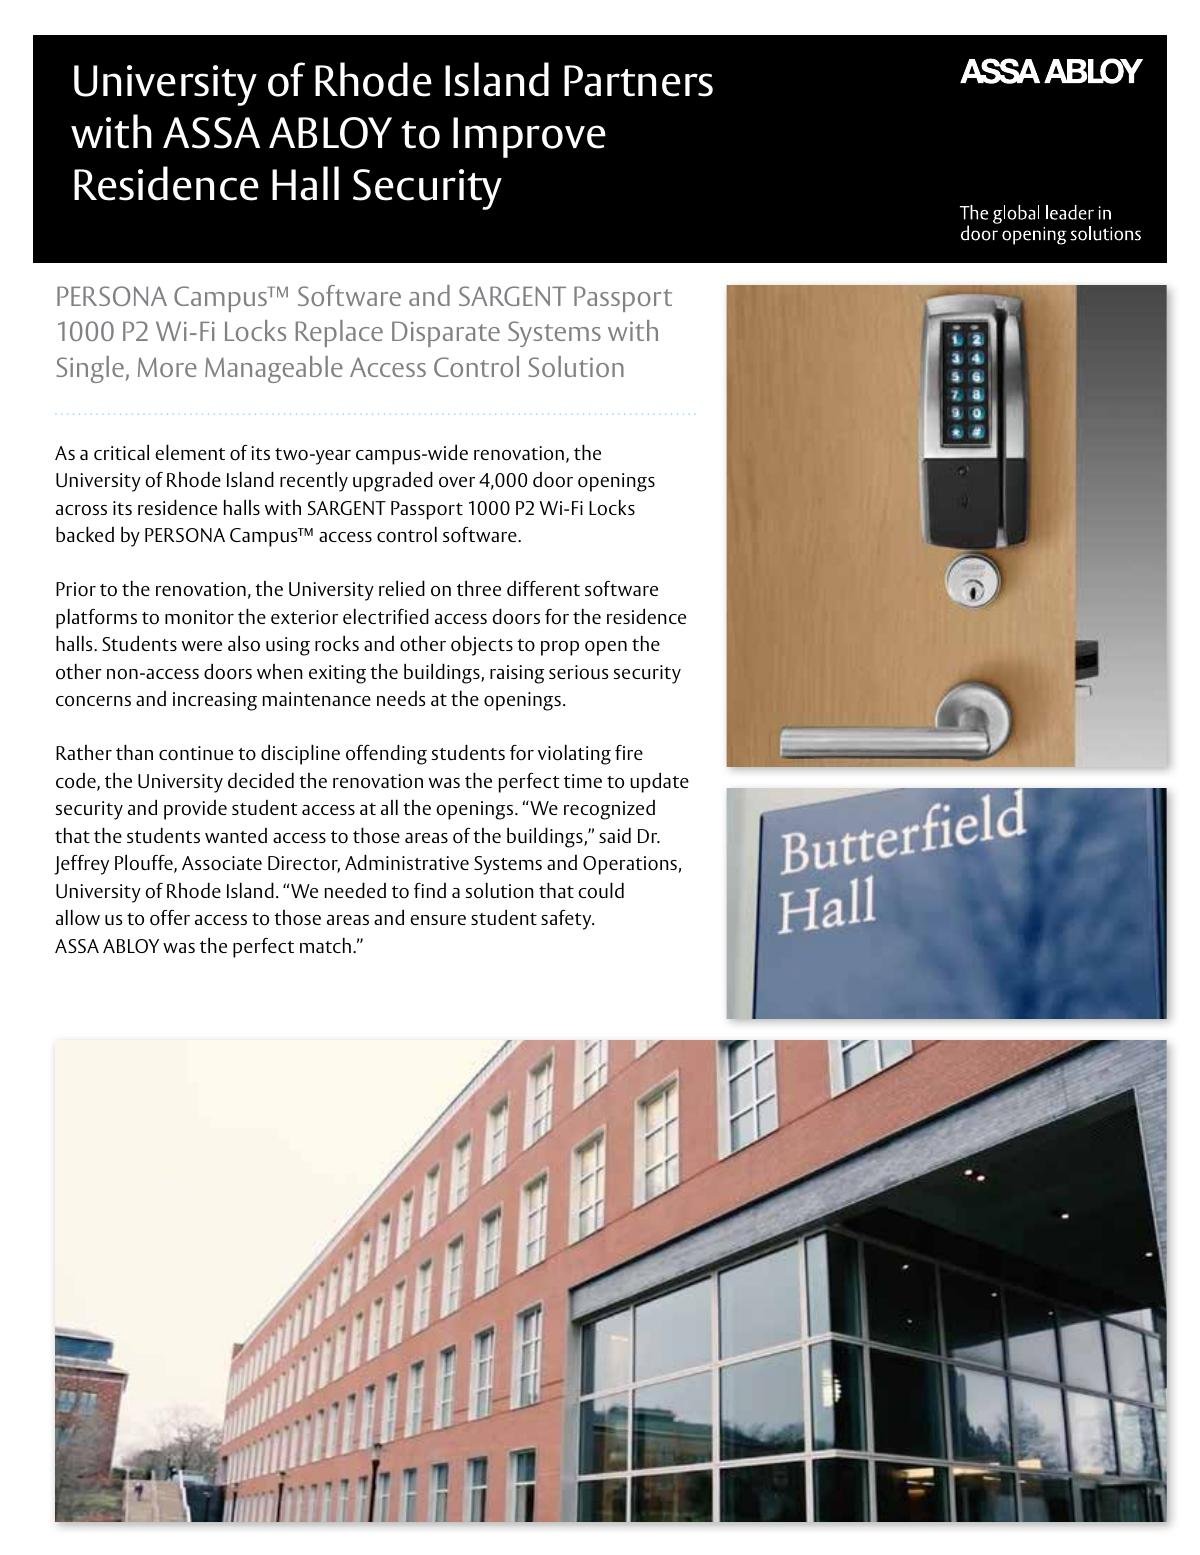 University of Rhode Island Partners with ASSA ABLOY to Improve Residence Hall Security